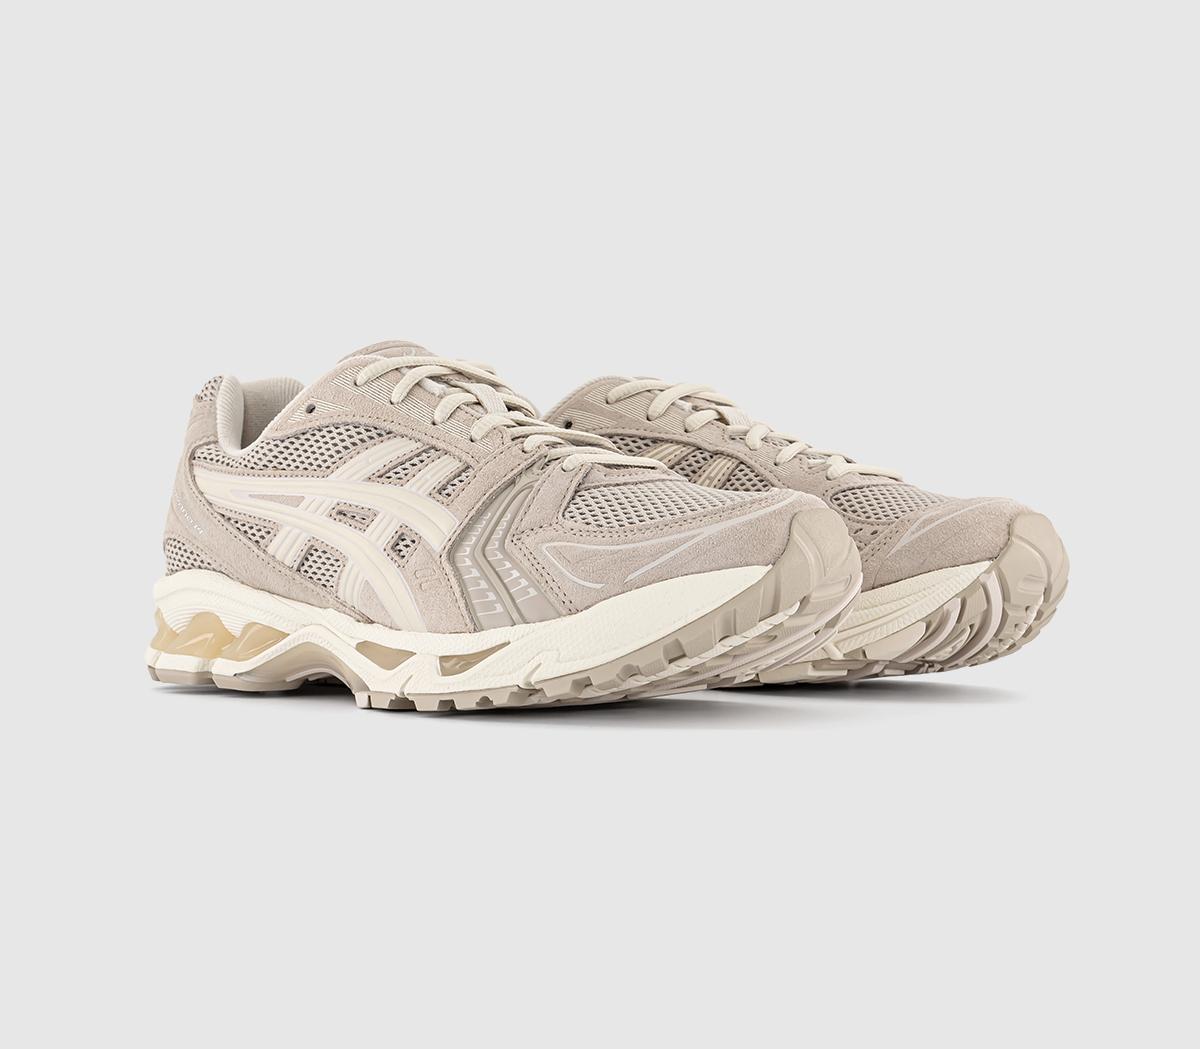 Asics Gel-kayano 14 Trainers Simply Taupe Oatmeal Natural, 8